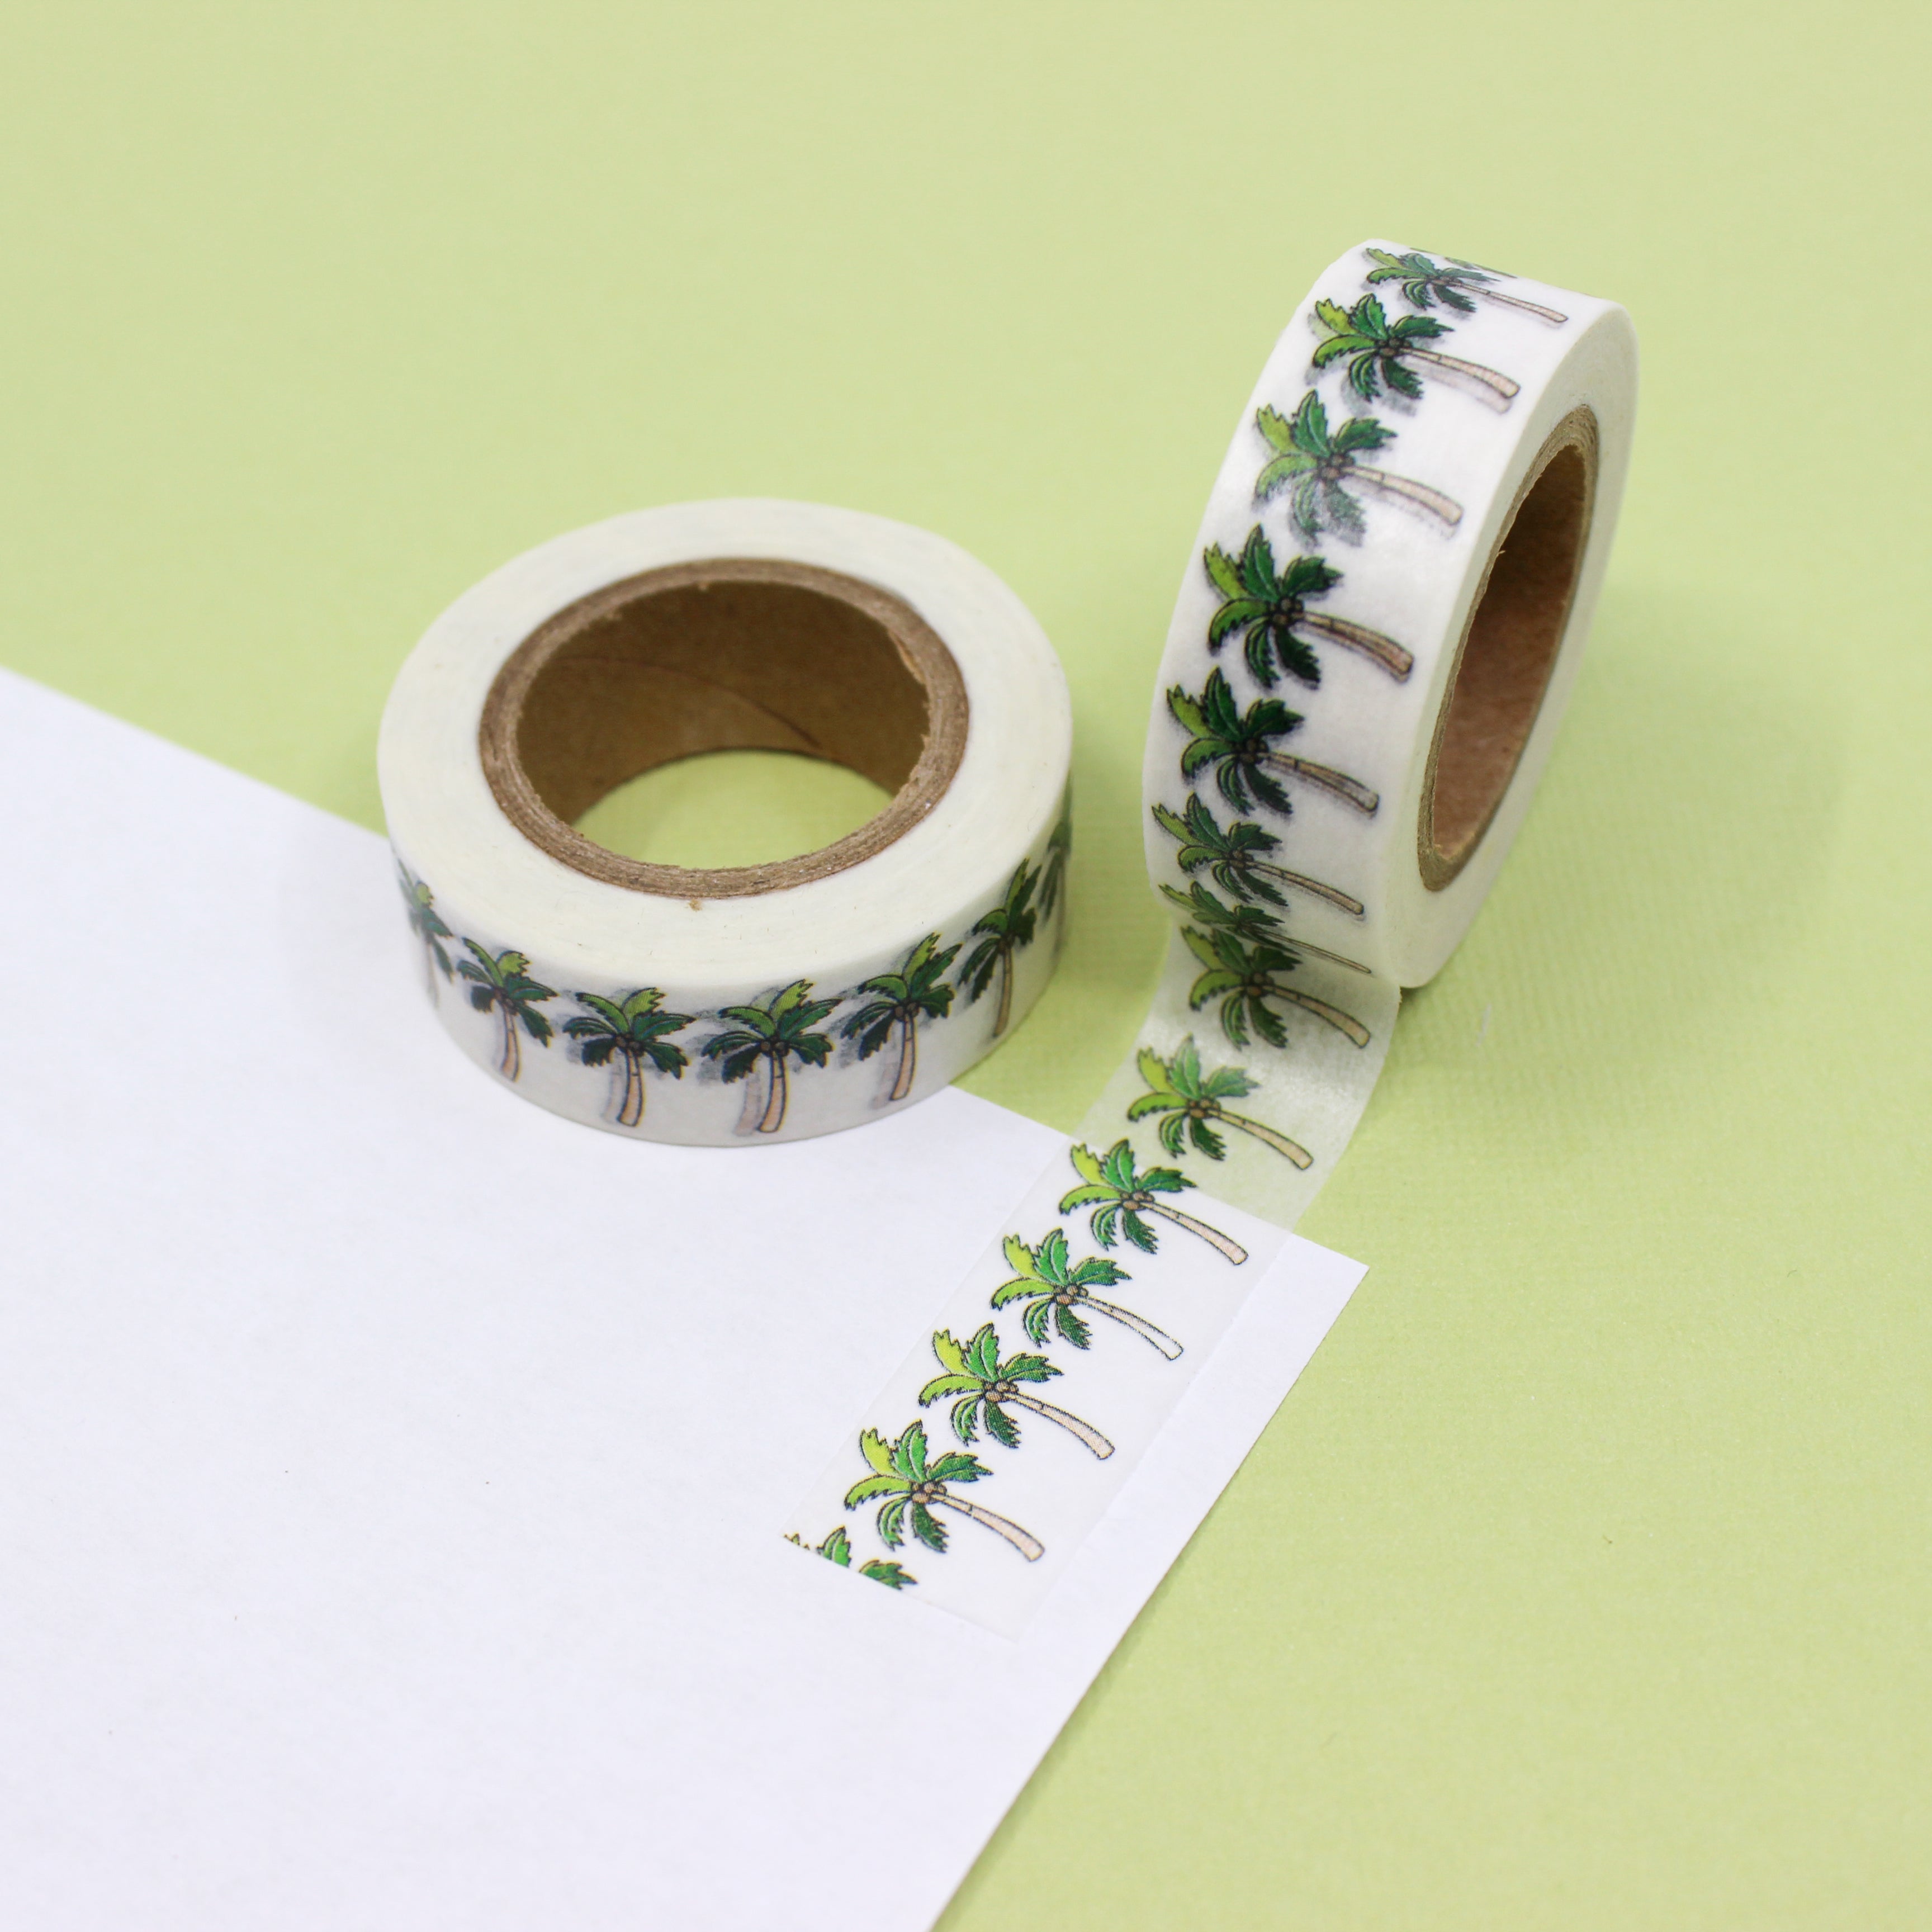 This is a green palm tree pattern Washi Tape from BBB Supplies Craft Shop